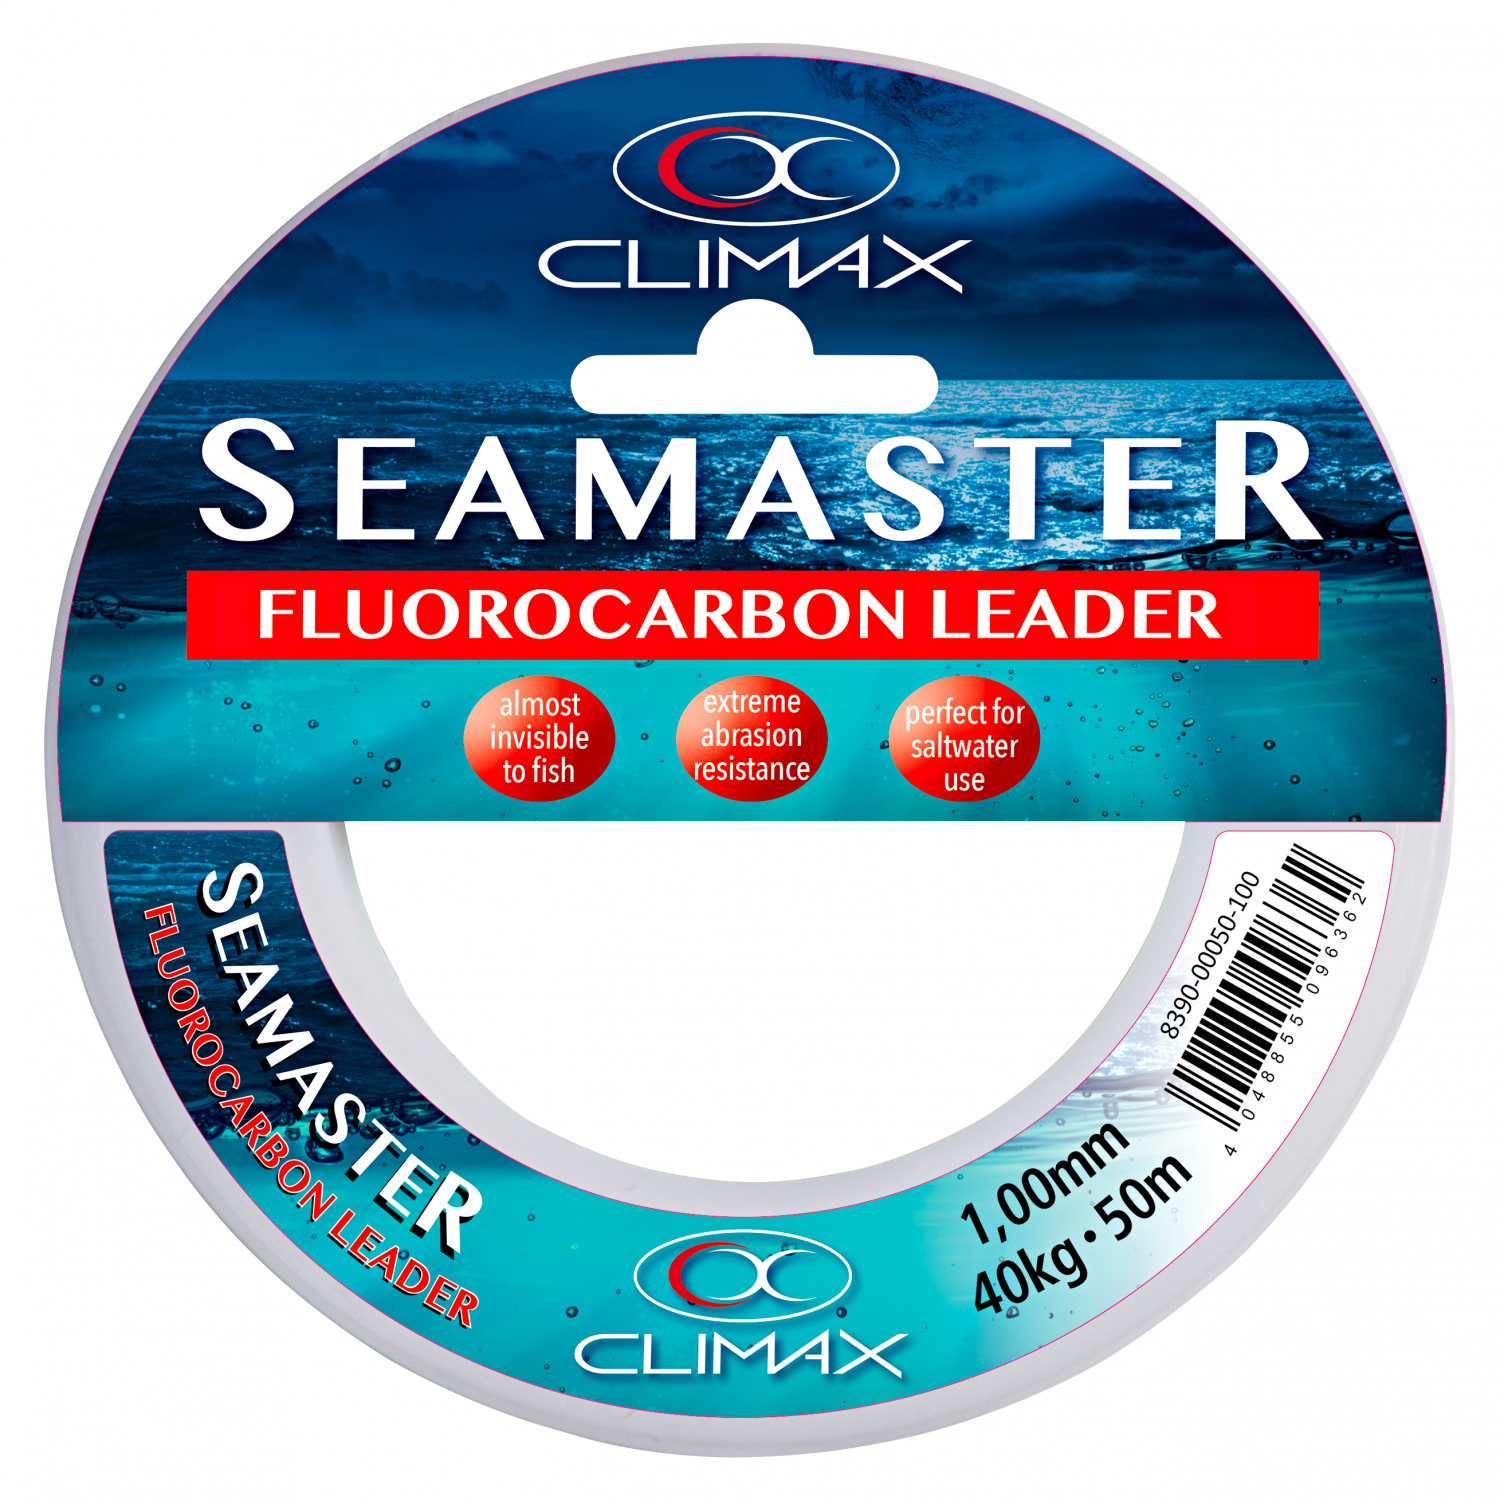 Climax Leader Fishing Line Seamaster Fluorocarbon (50 m) at low prices